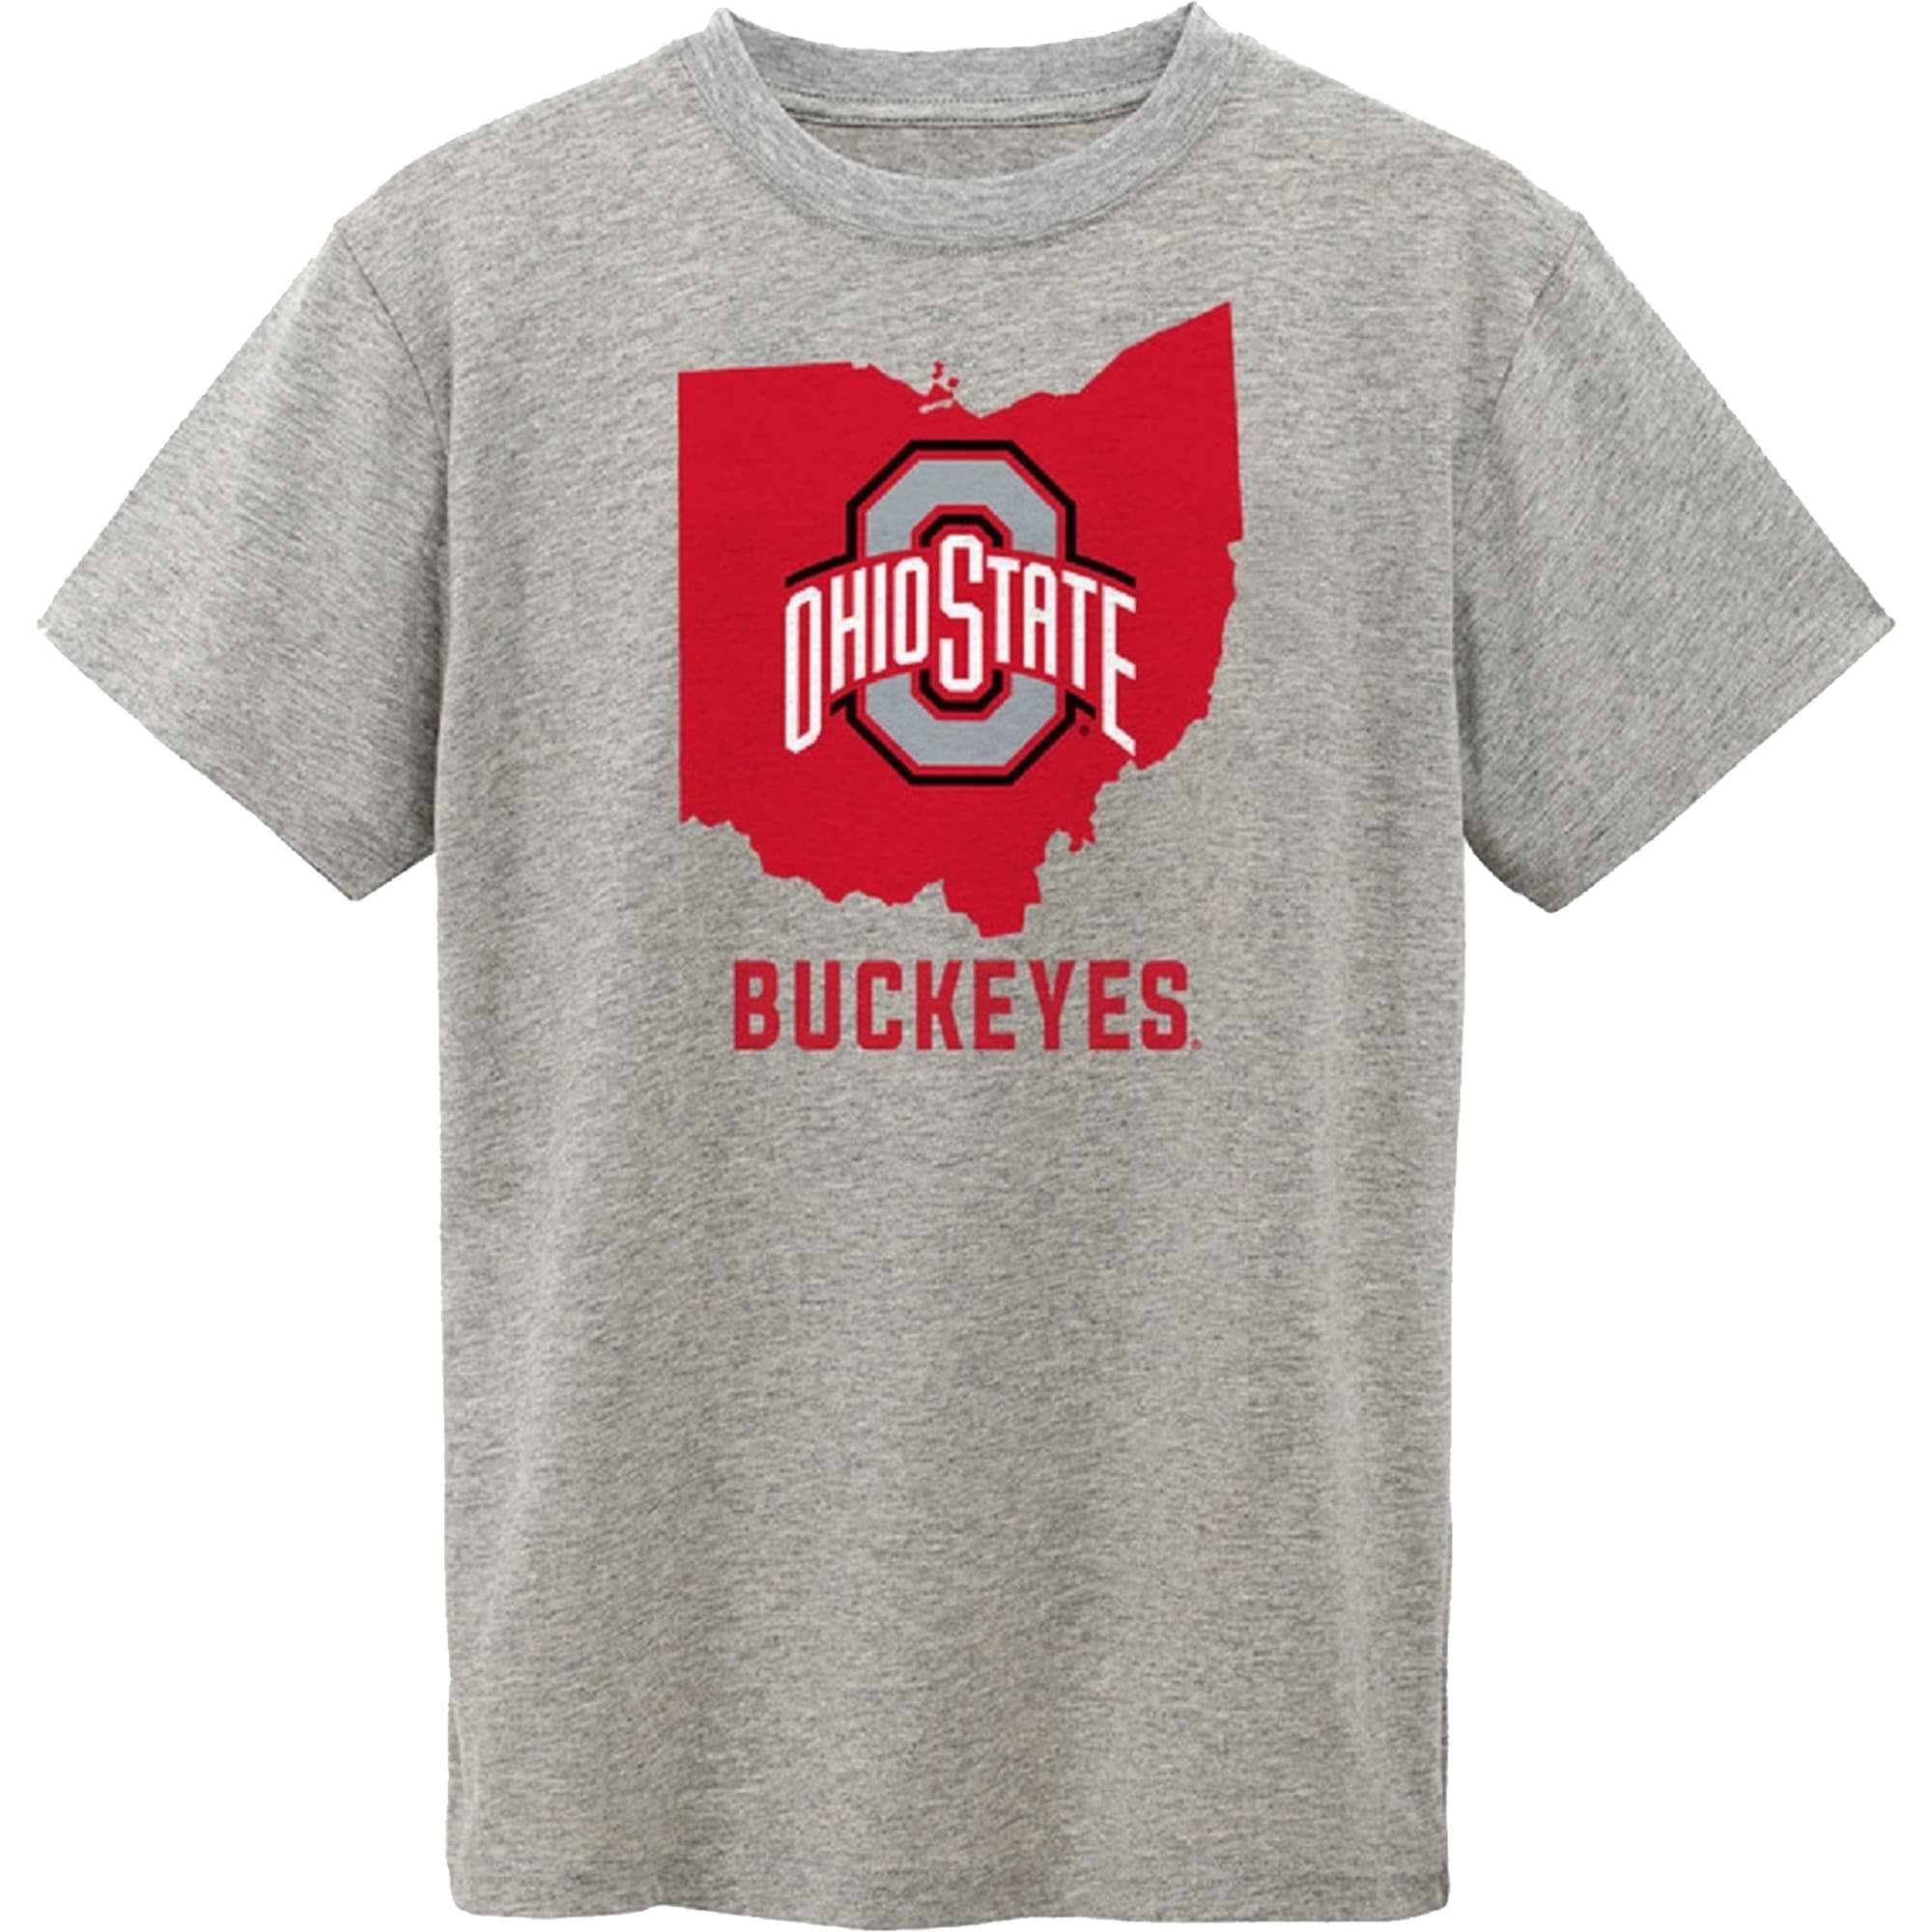 NEW Athletic Gray Shirt Youth sizes S-M-XL by Buckeye Brand Authentic Apparel 